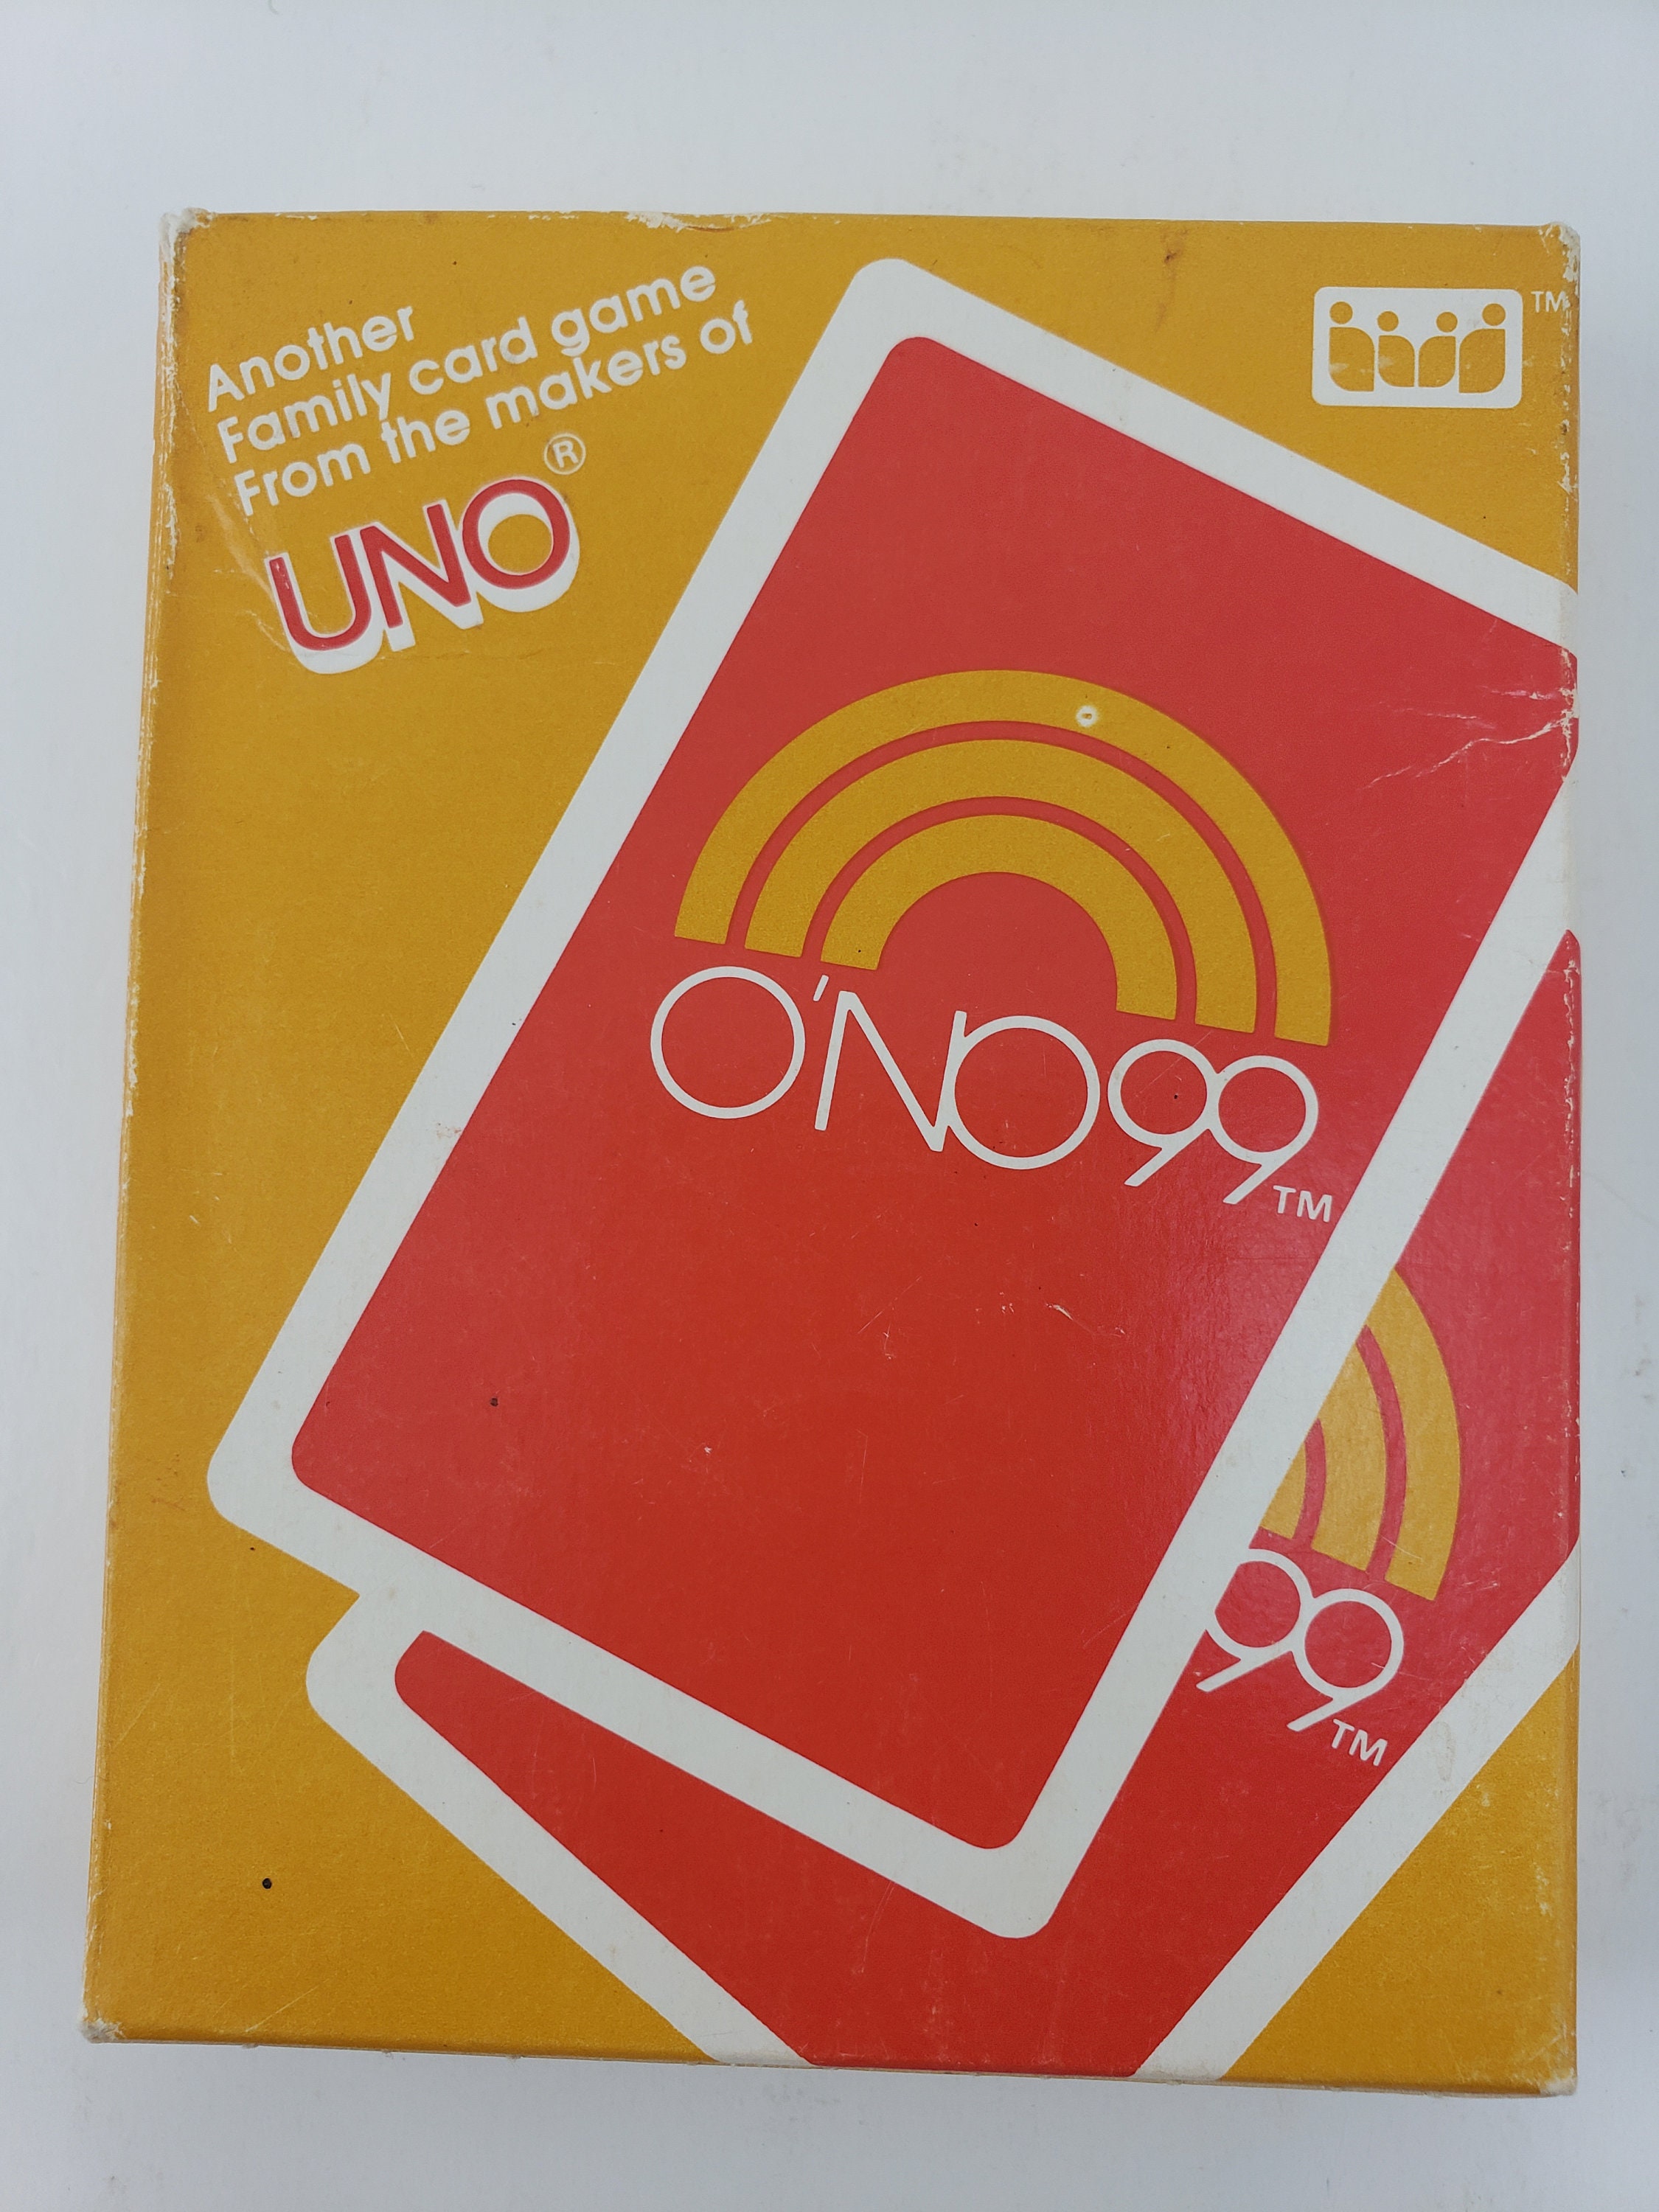  ONO 99 Card Game From The Makers Of Uno 1980 by ONO 99 Card  Game From The Makers Of Uno 1980 International Games : Toys & Games